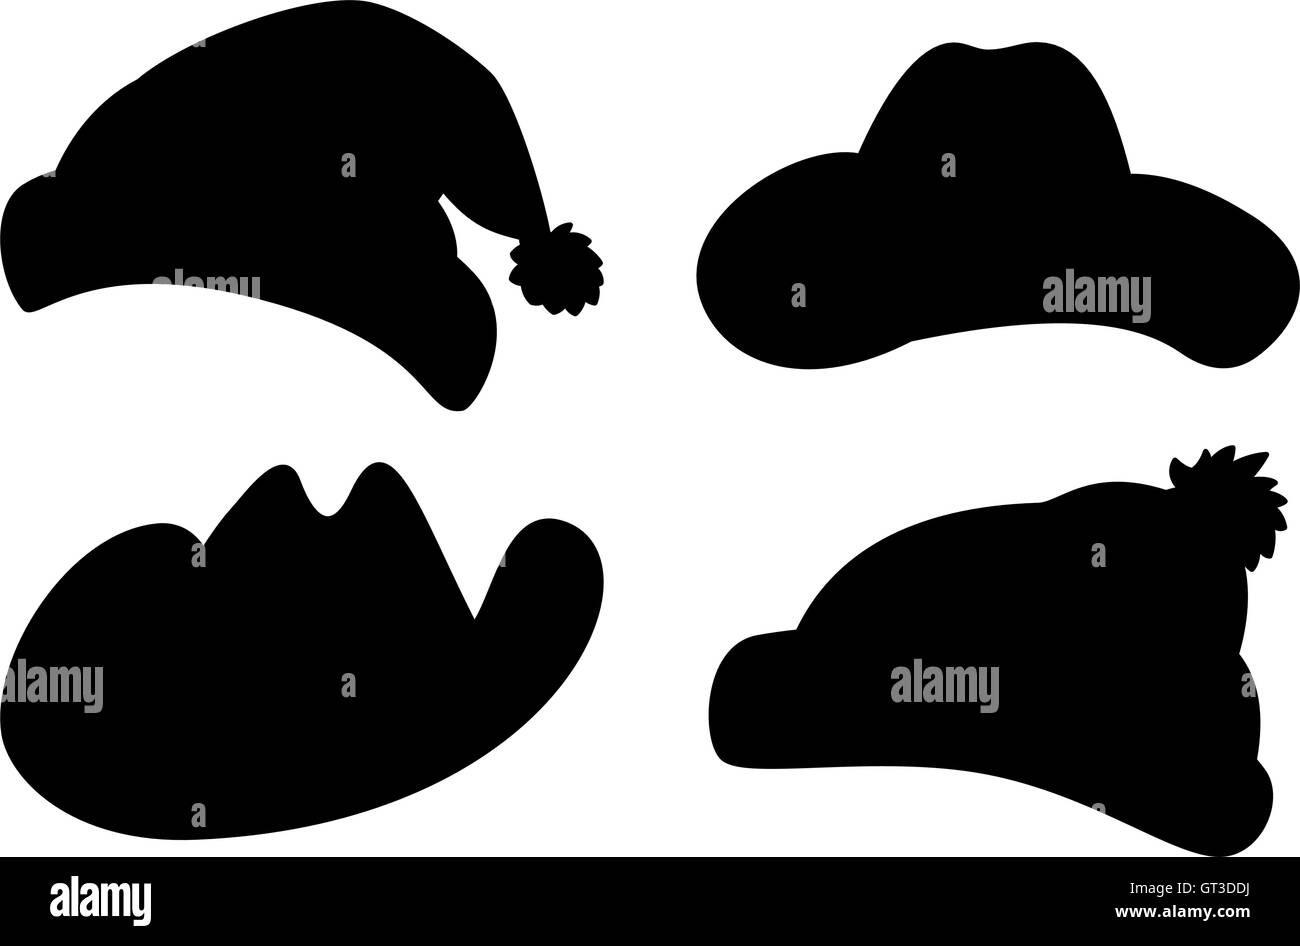 Black stetson hat Stock Vector Images - Alamy